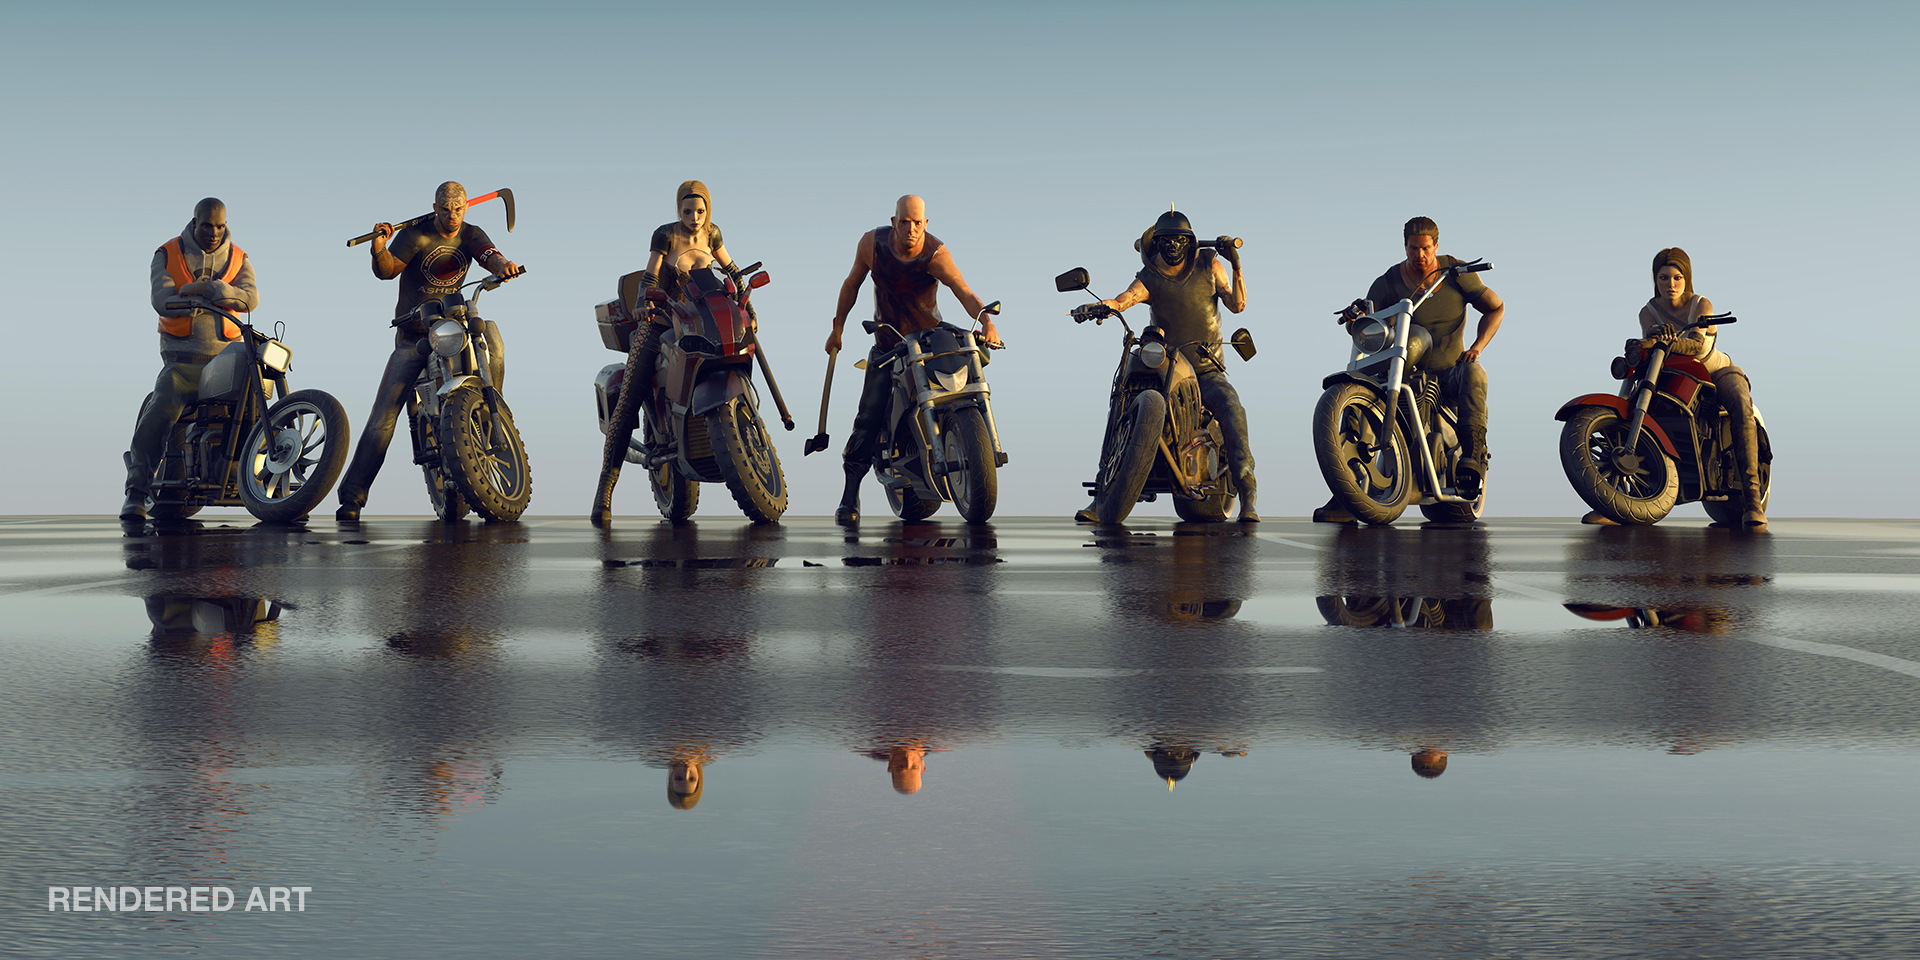 Video Game Road Rage HD Wallpaper | Background Image